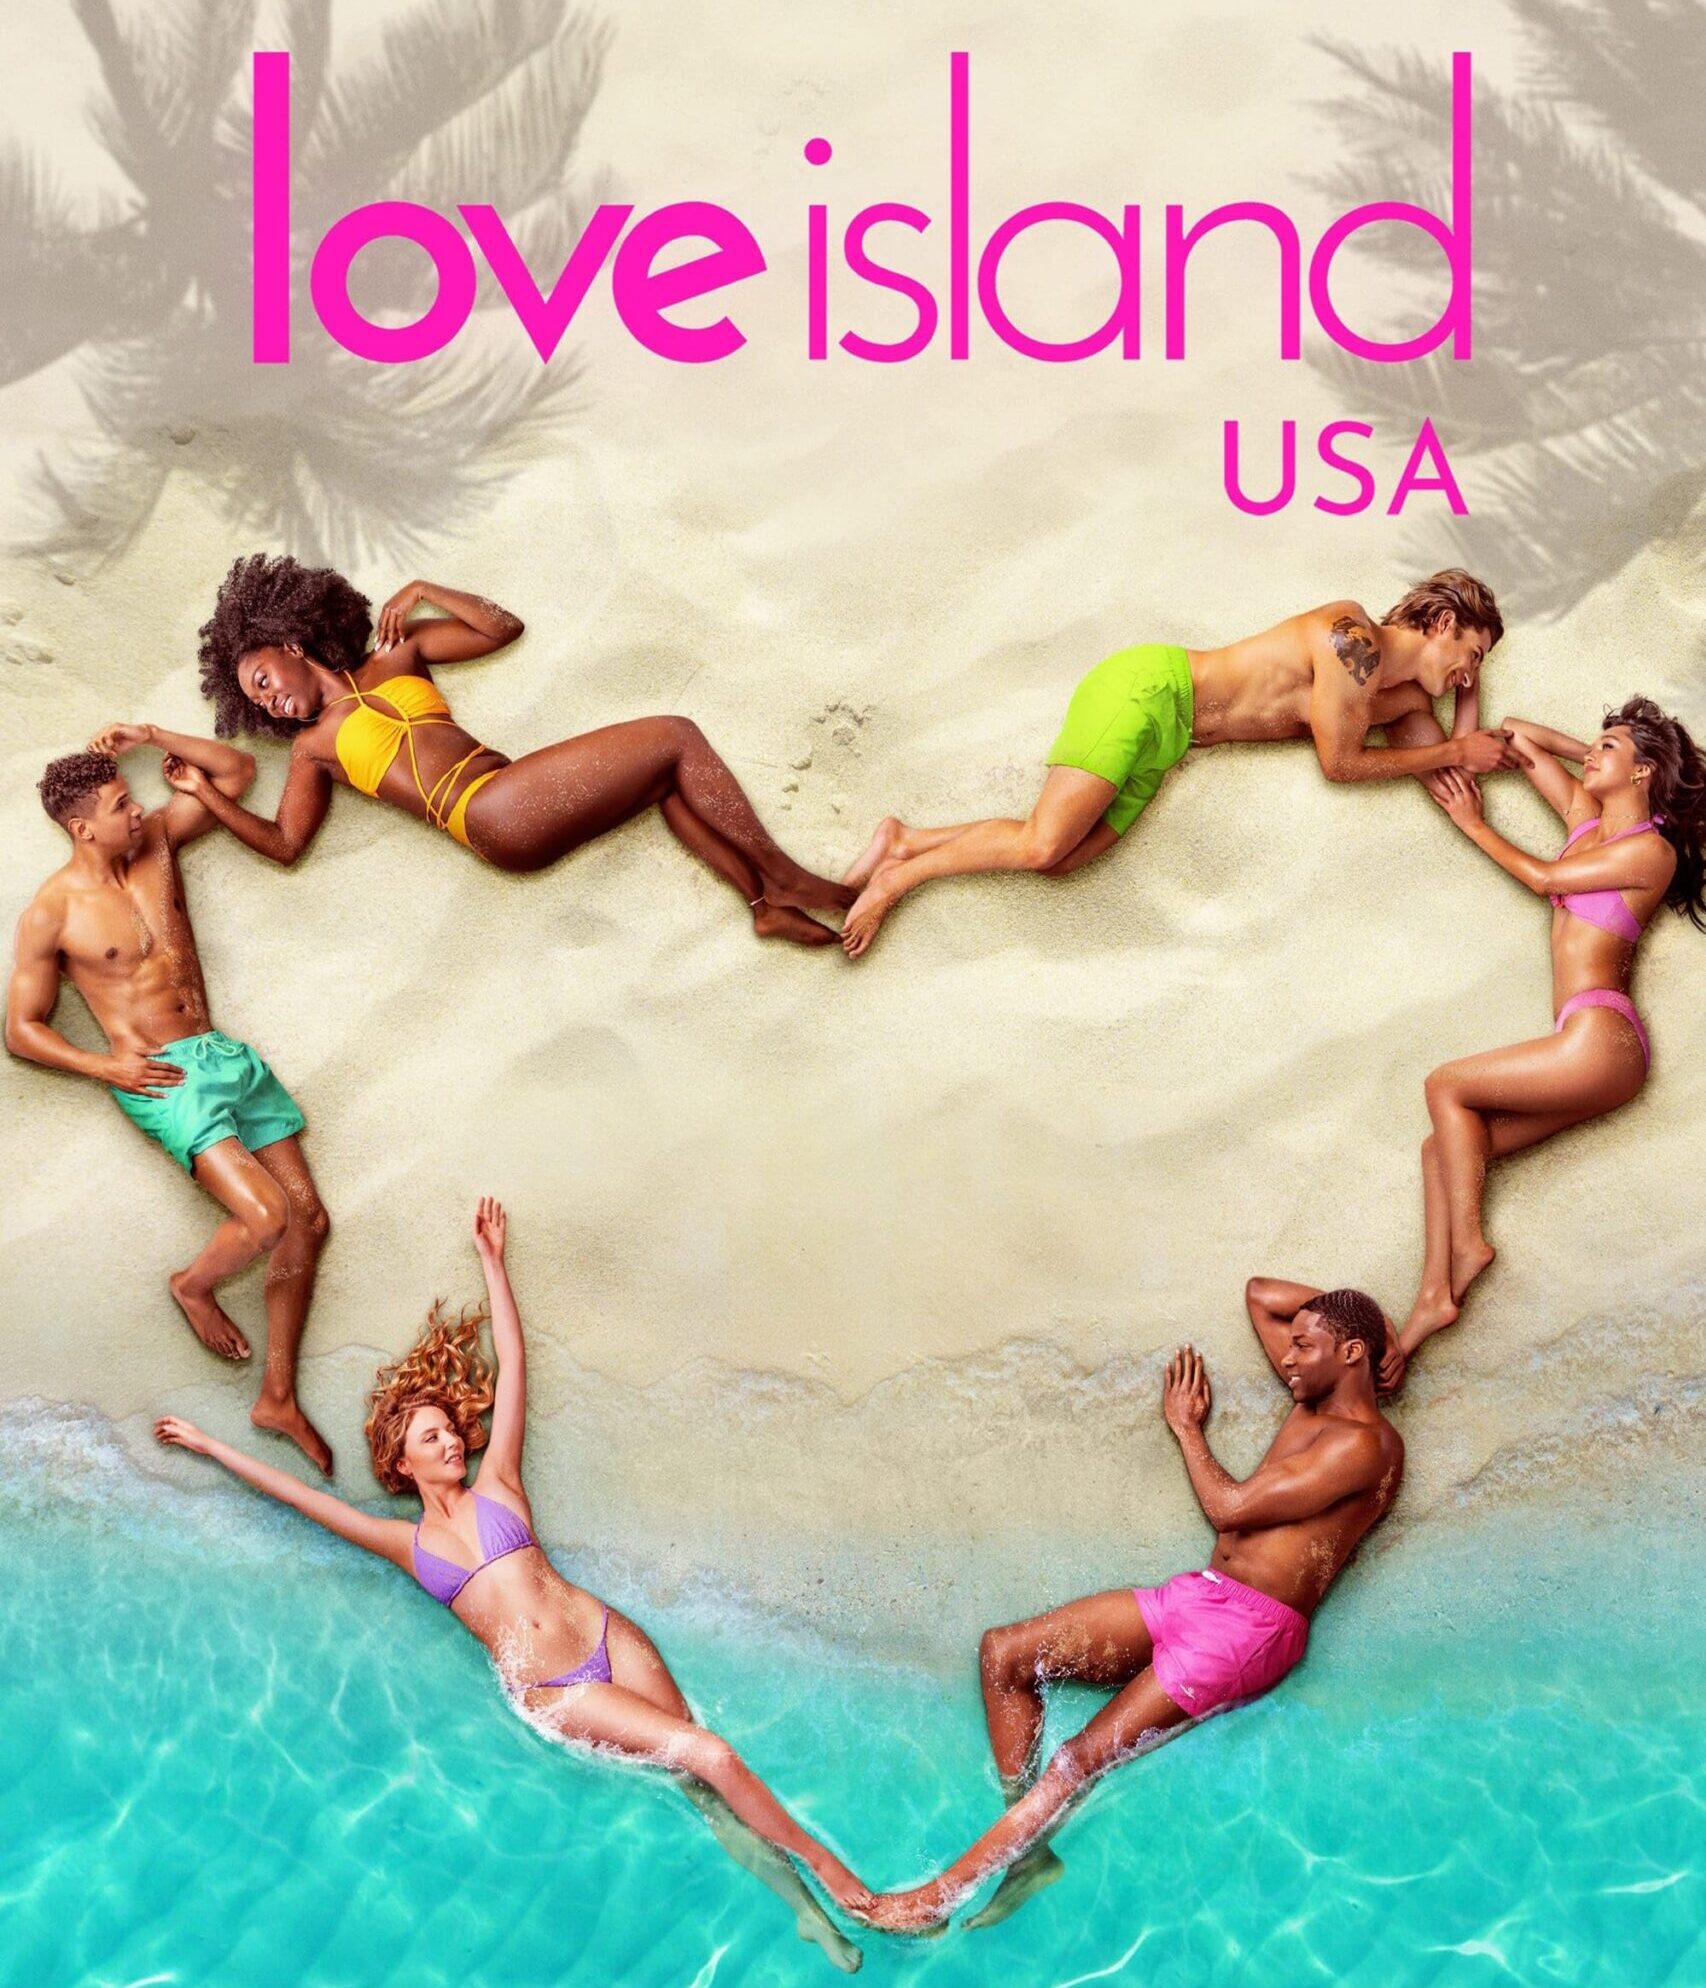 Love Island USA – Where Are They Now? A Catch Up